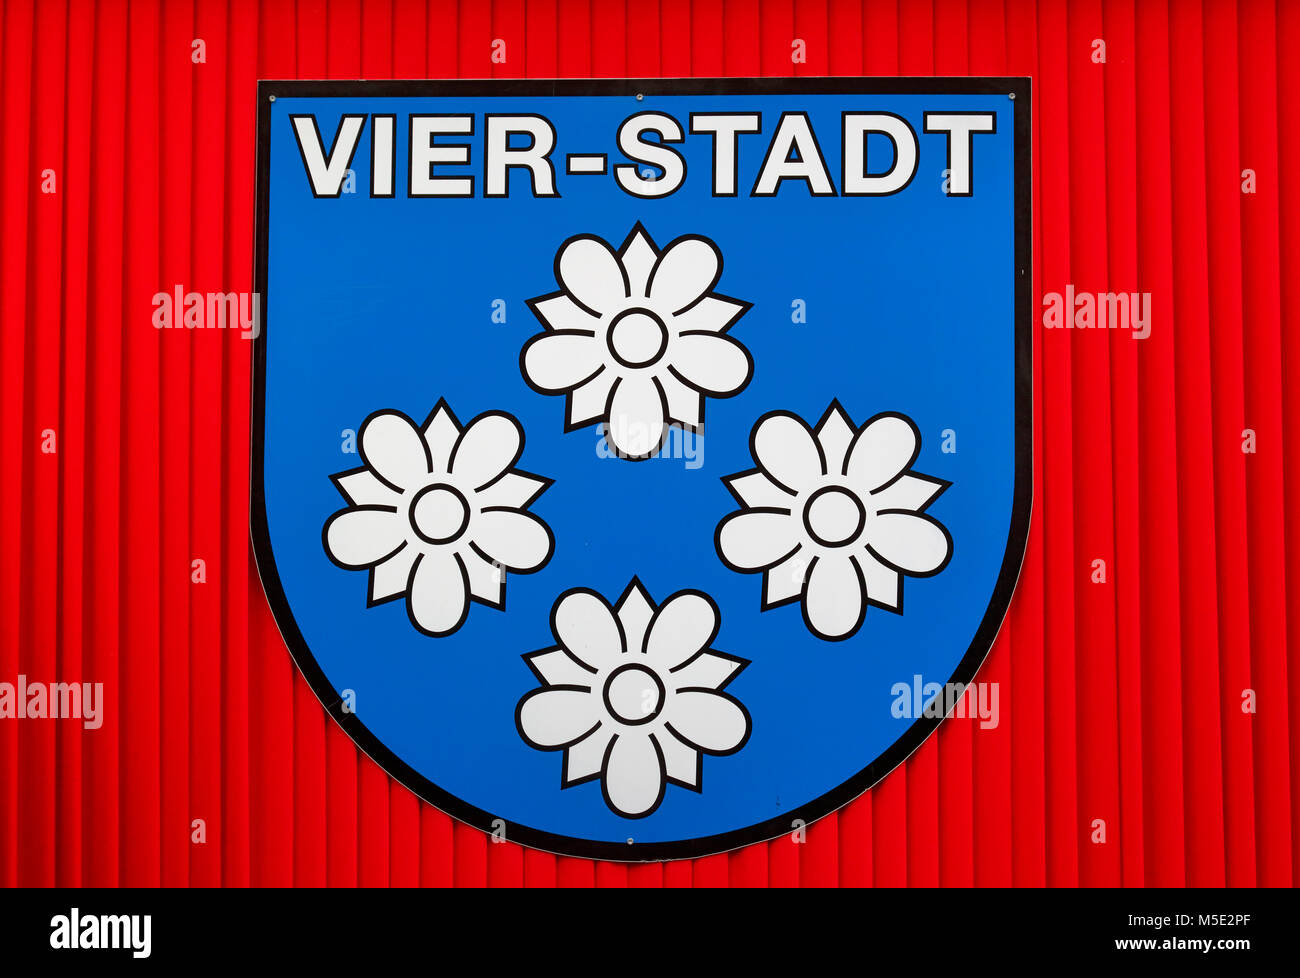 Rhenish carnival,Rose Monday,Shrove Monday procession 2018 in Duelken,Four Town city arms at a carnival float shows four medlar blooms,the official town coat of arms covers three medlars only representing the districts Viersen,Duelken and Suechteln,a citizens movement demands for a  fourth medlar to represent the fourth district Boisheim,D-Viersen,D-Viersen-Duelken,D-Viersen-Boisheim,Lower Rhine,Rhineland,North Rhine-Westphalia,NRW Stock Photo